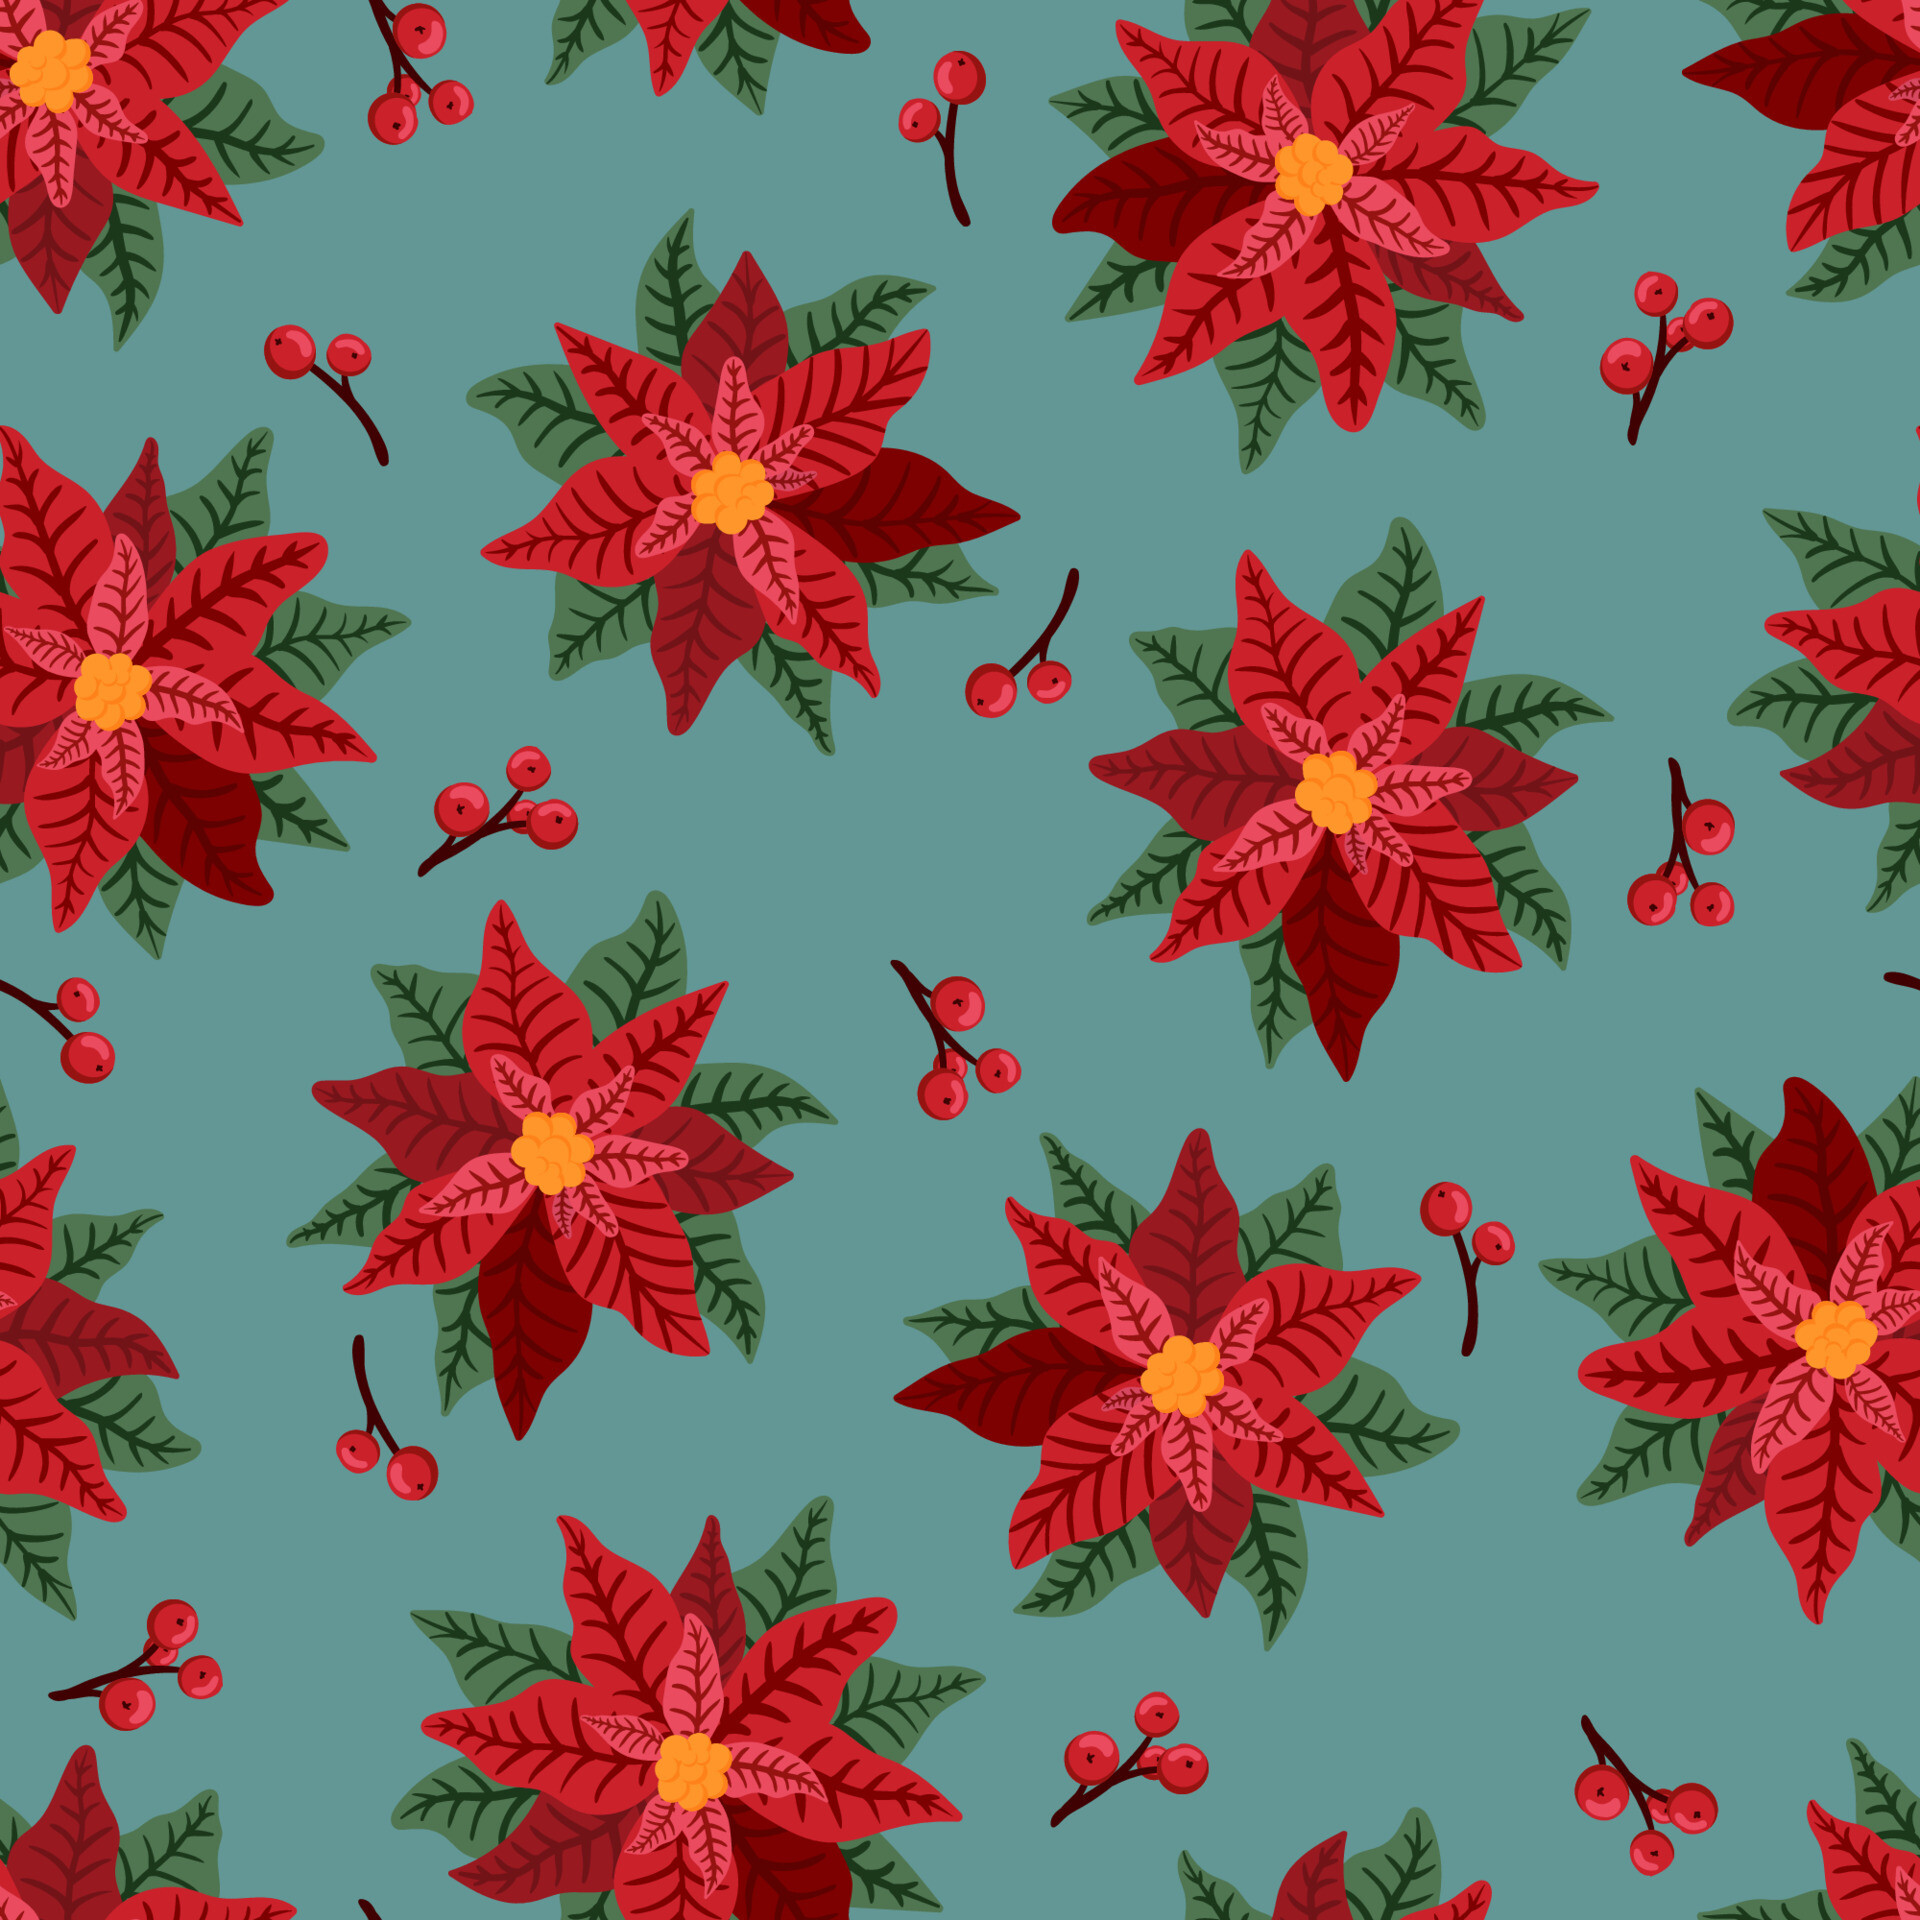 Poinsettia: The star-shaped leaf pattern is said to symbolize the Star of Bethlehem, and the red color represents the blood sacrifice of Jesus's crucifixion. 1920x1920 HD Wallpaper.